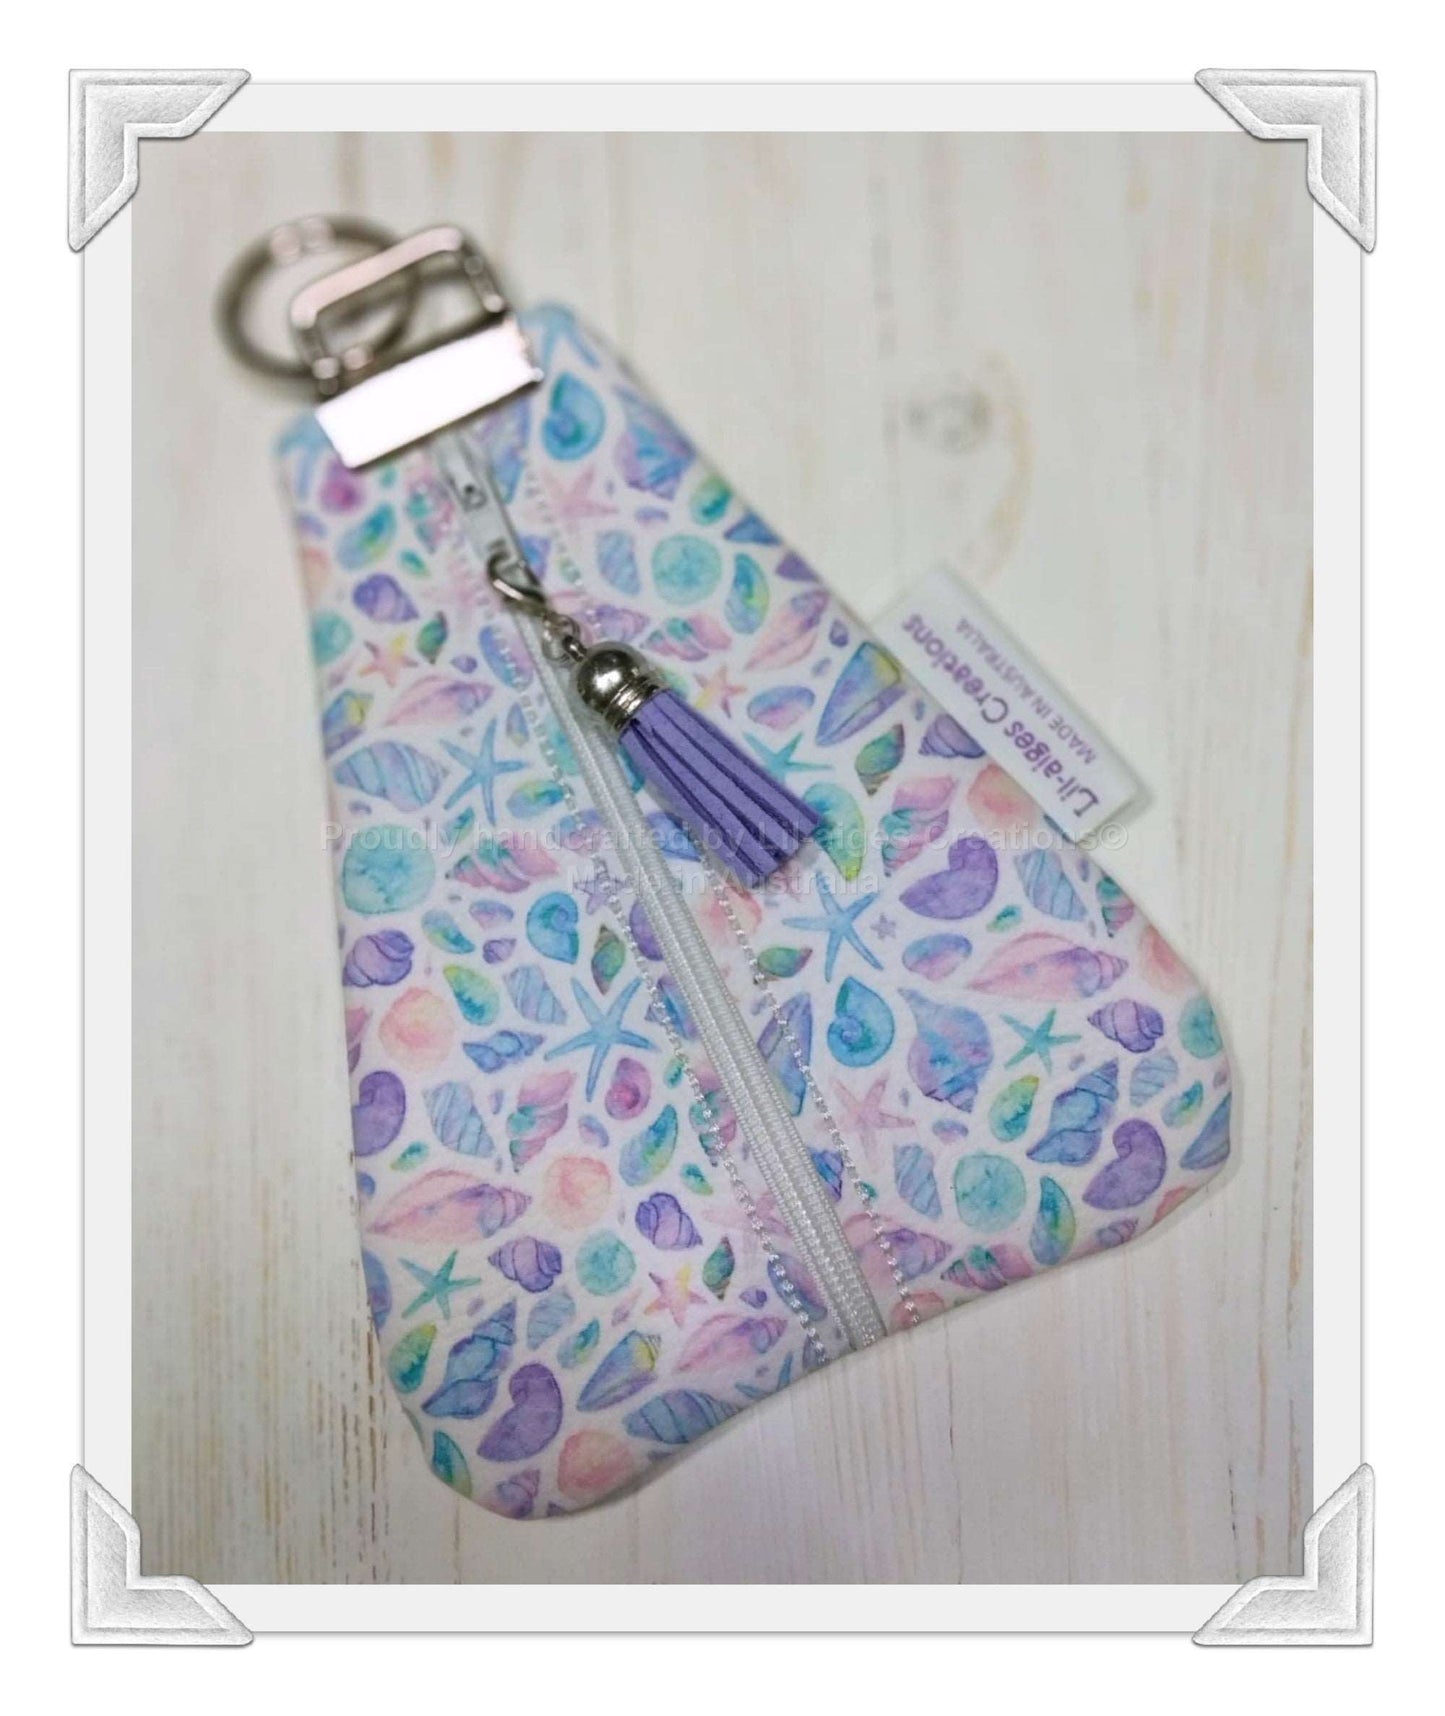 Seashell-themed zipper vinyl pouch coin purse, made in Australia - Lil-aiges Creations - Quality Australian-made Gifts